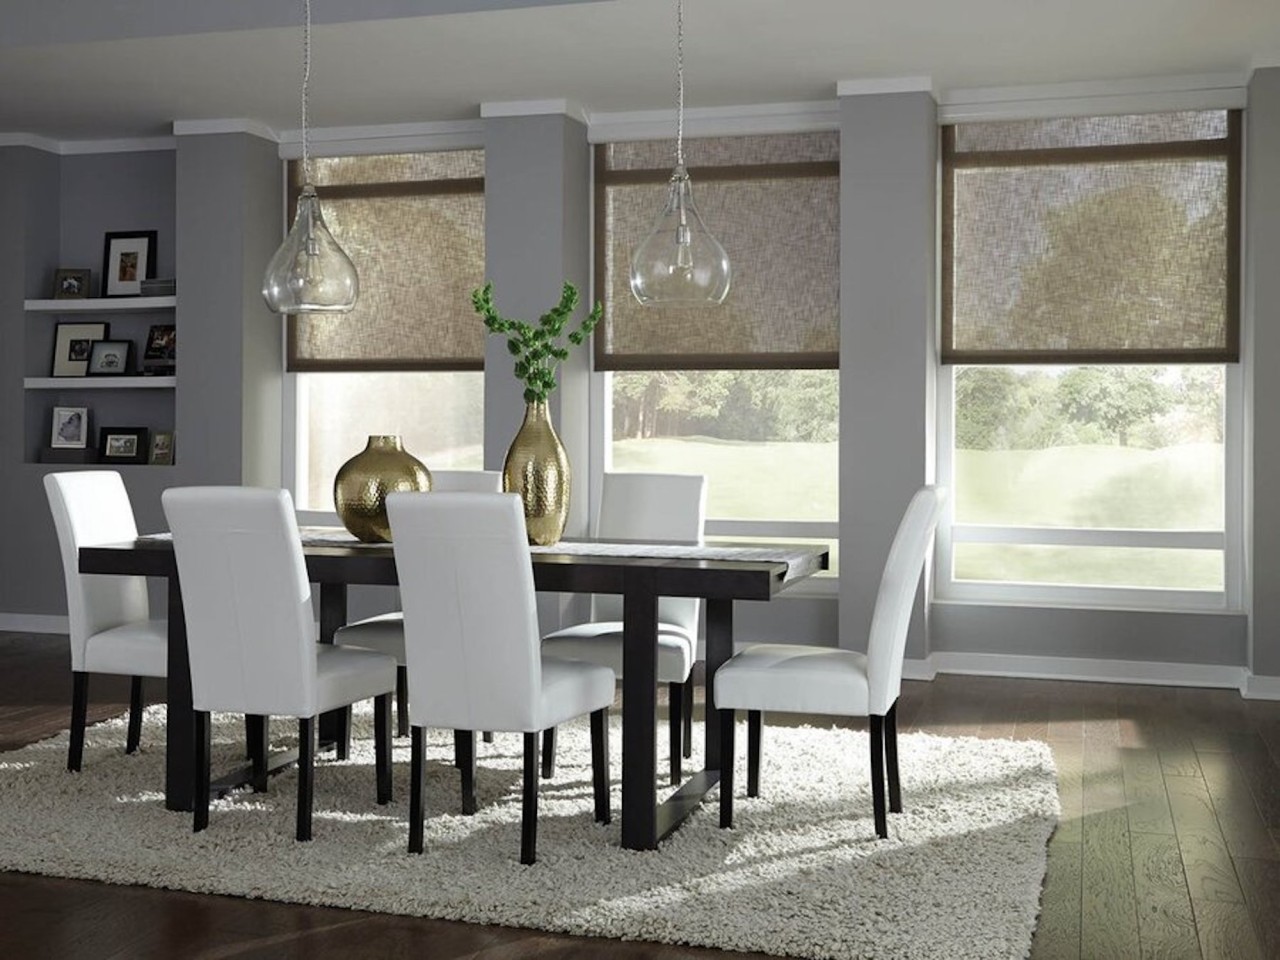 A dining table with windows in the background featuring Lutron motorized shades.